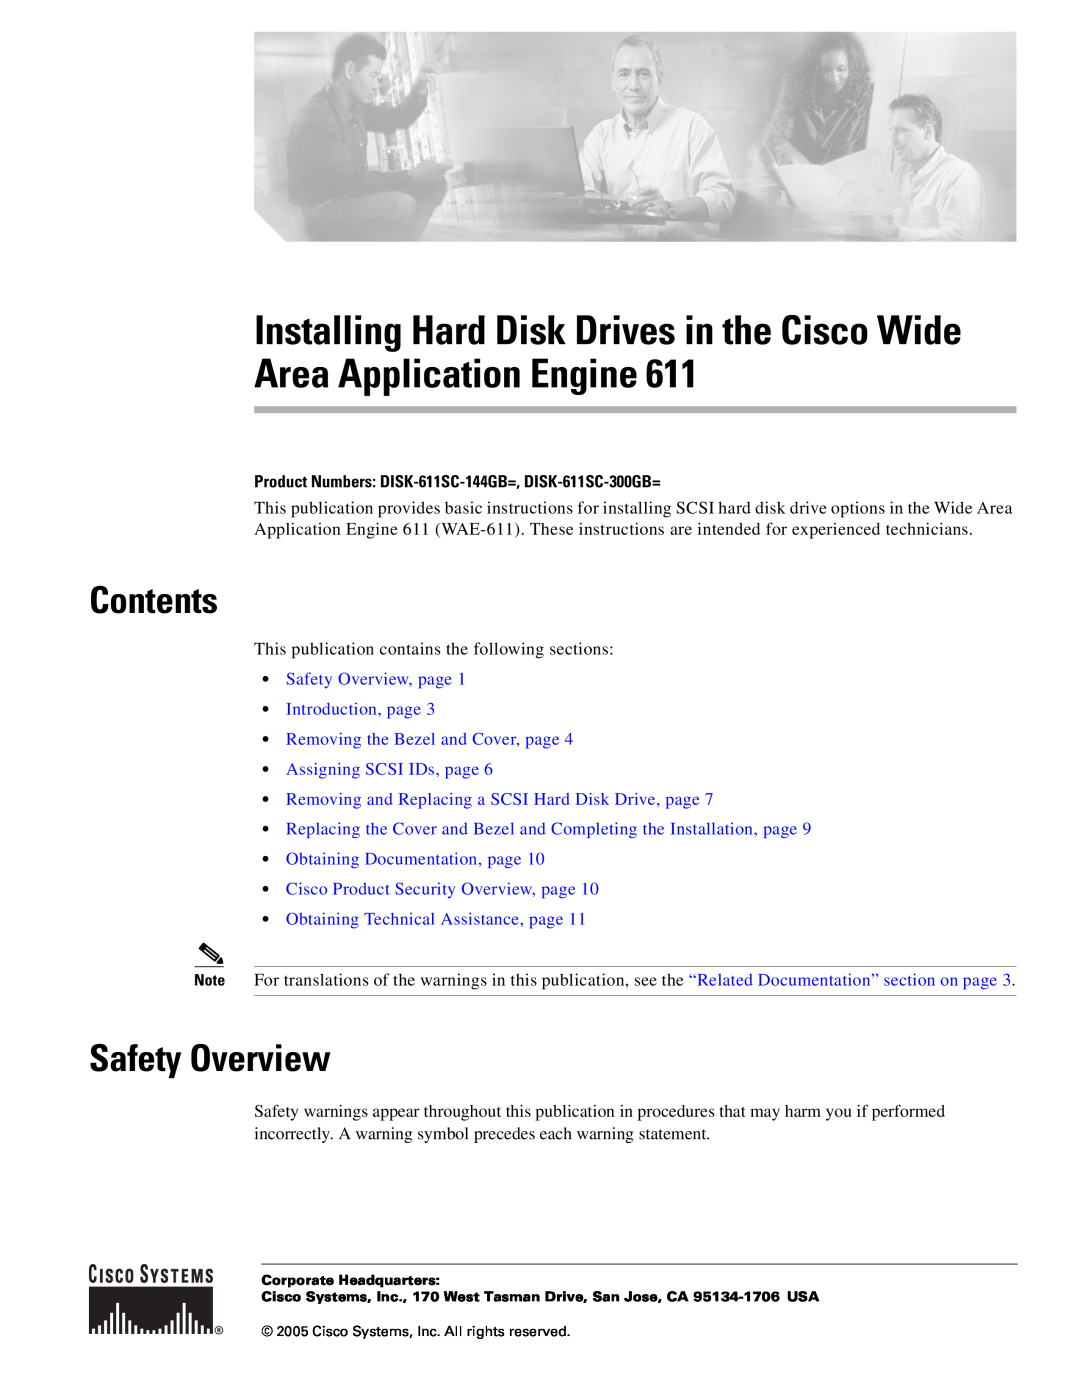 Cisco Systems Engine 611 manual Installing Hard Disk Drives in the Cisco Wide Area Application Engine, Contents 